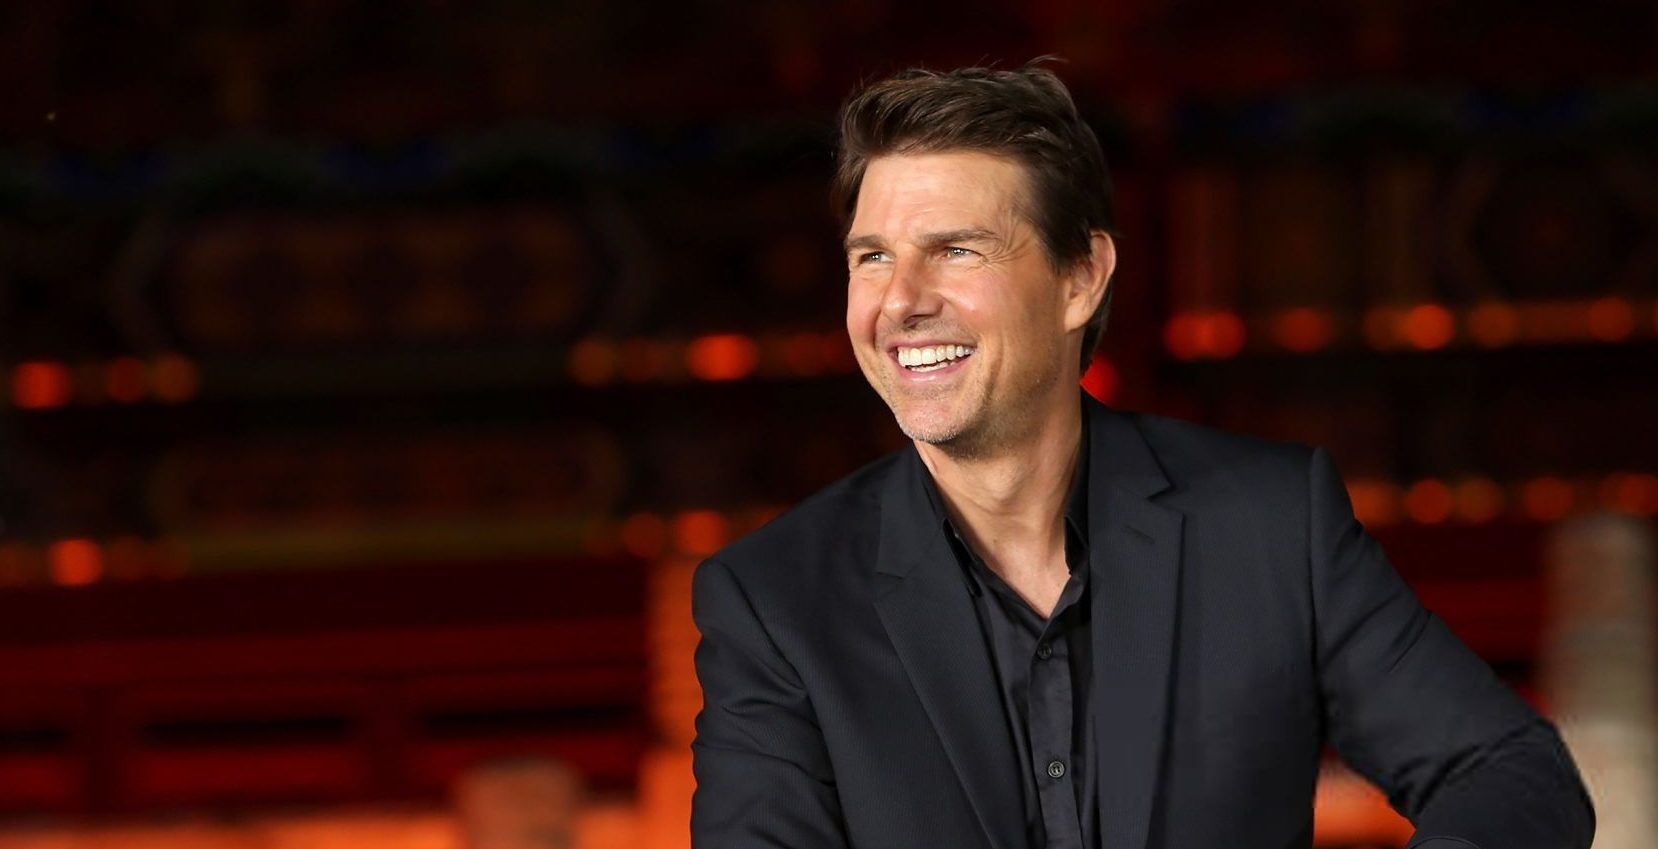 Tom Cruise Returns Golden Globes Statues Amid HFPA Controversy